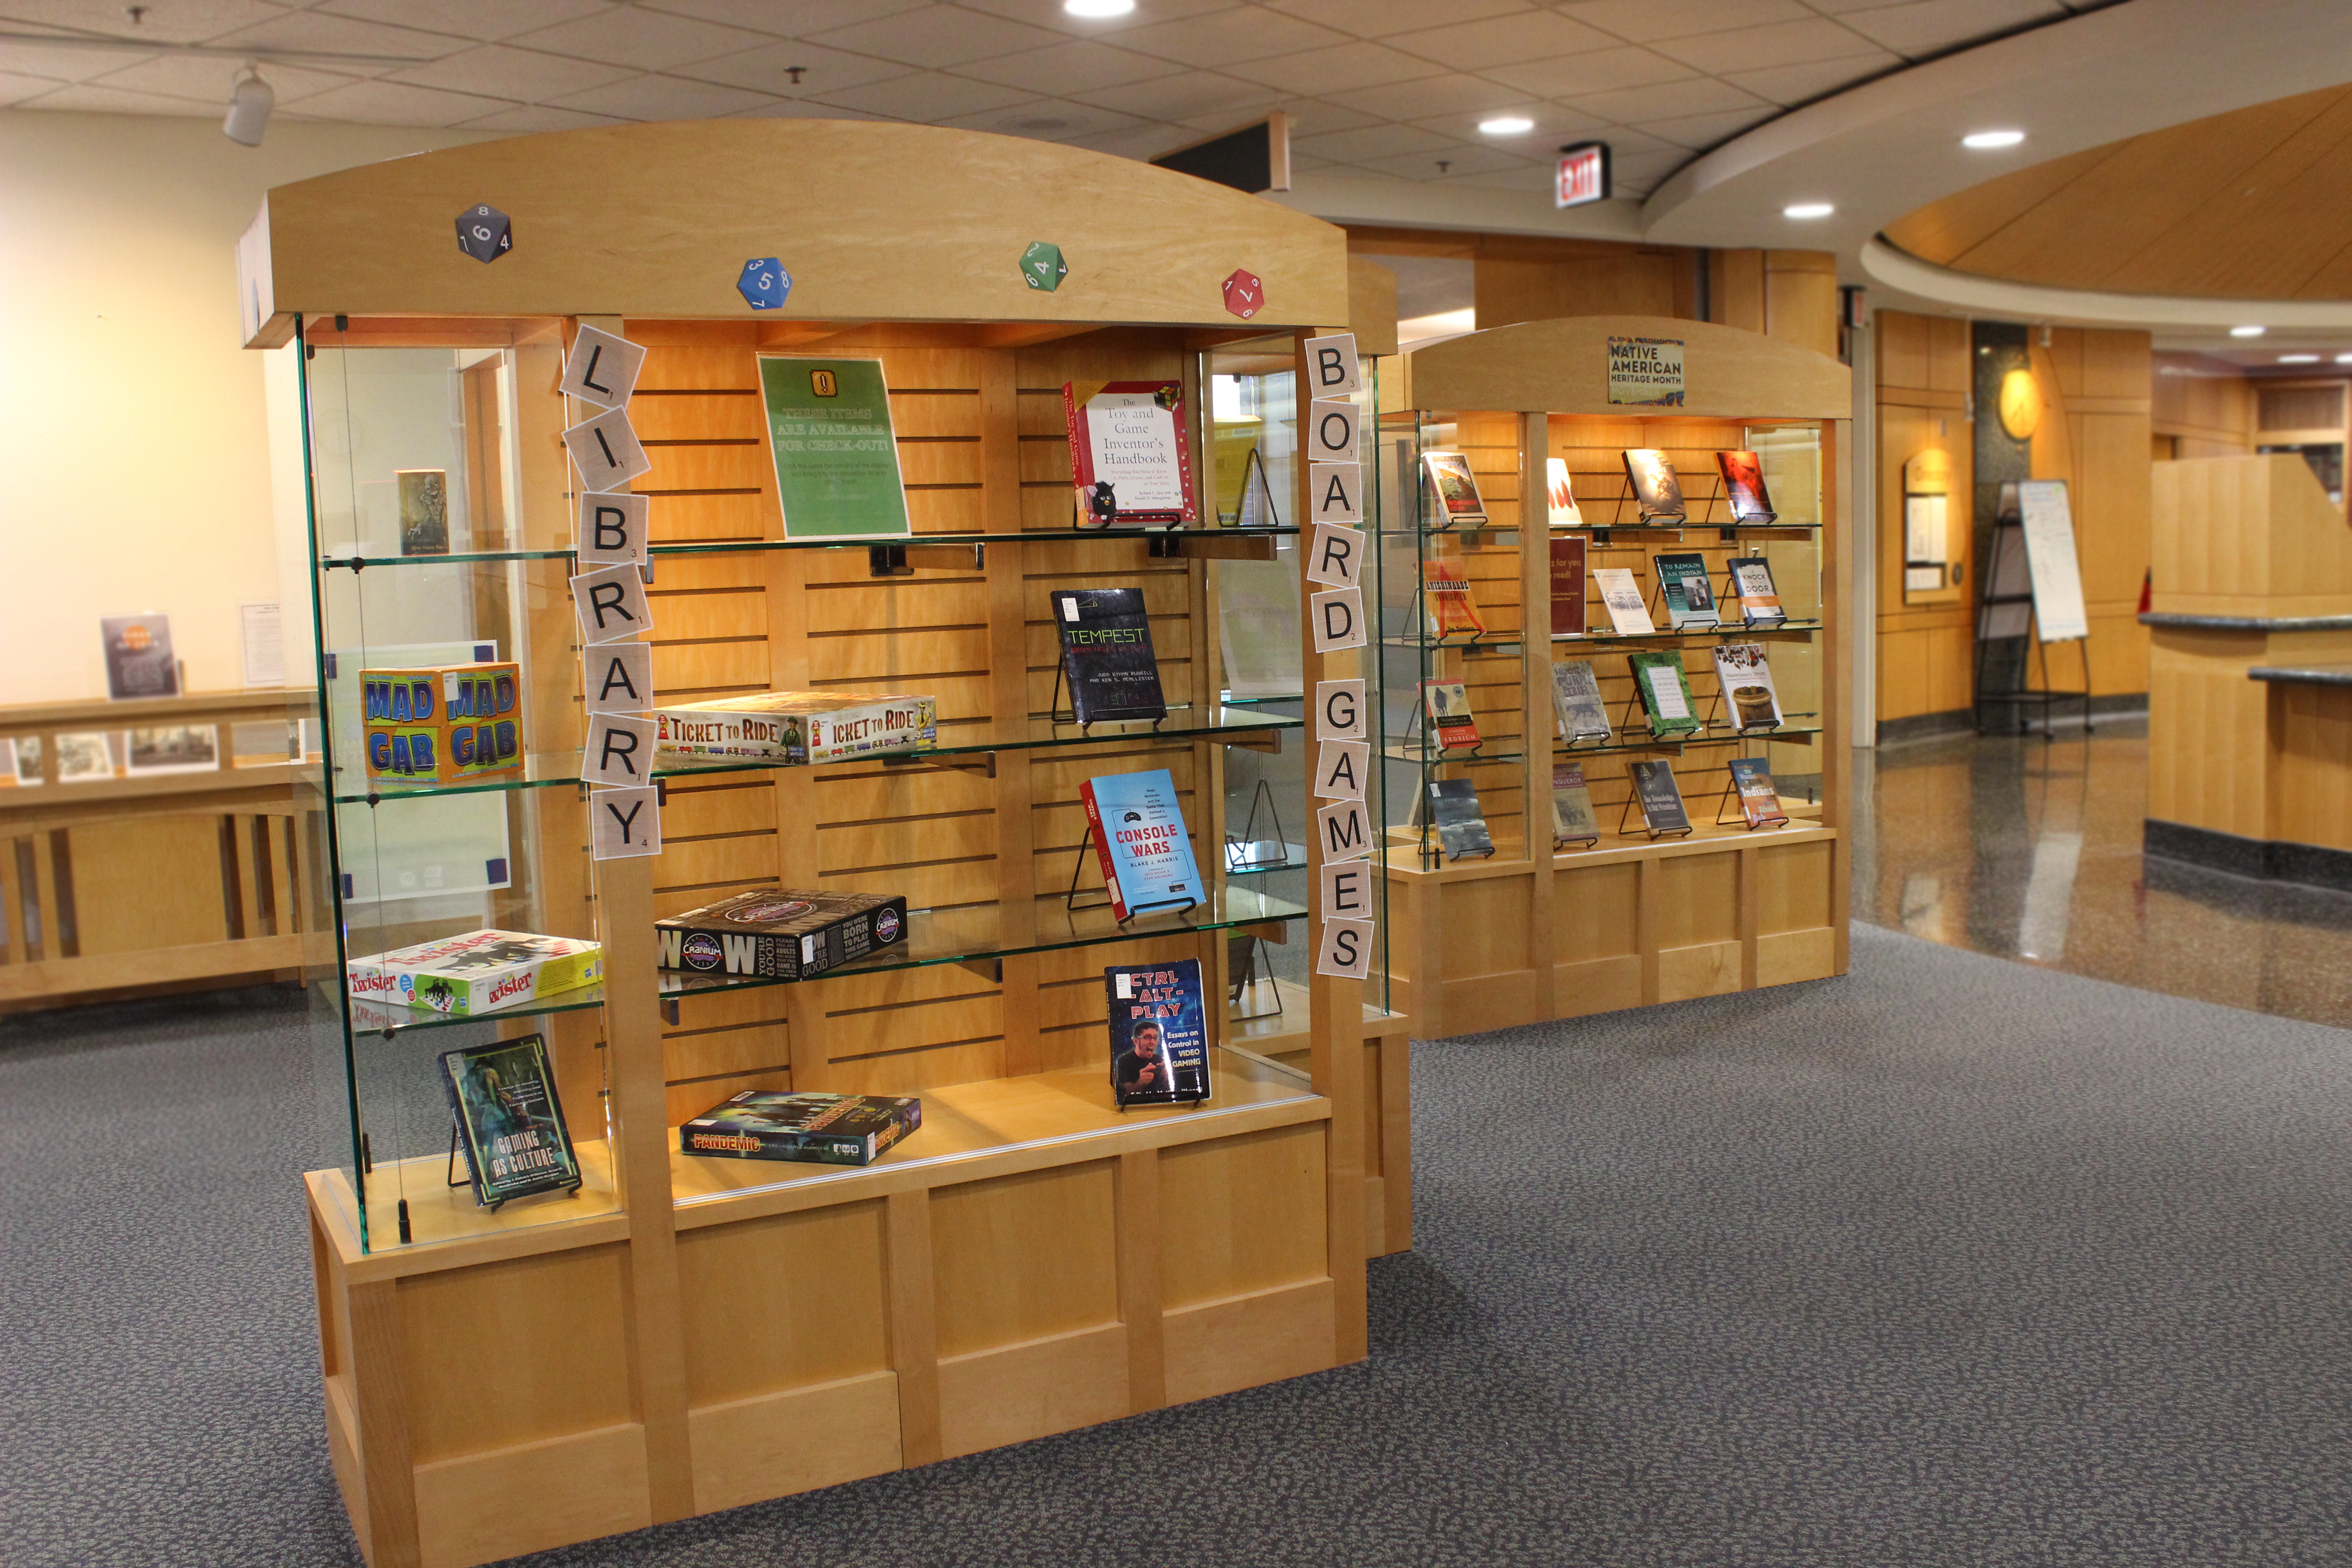 interior display cases in the library